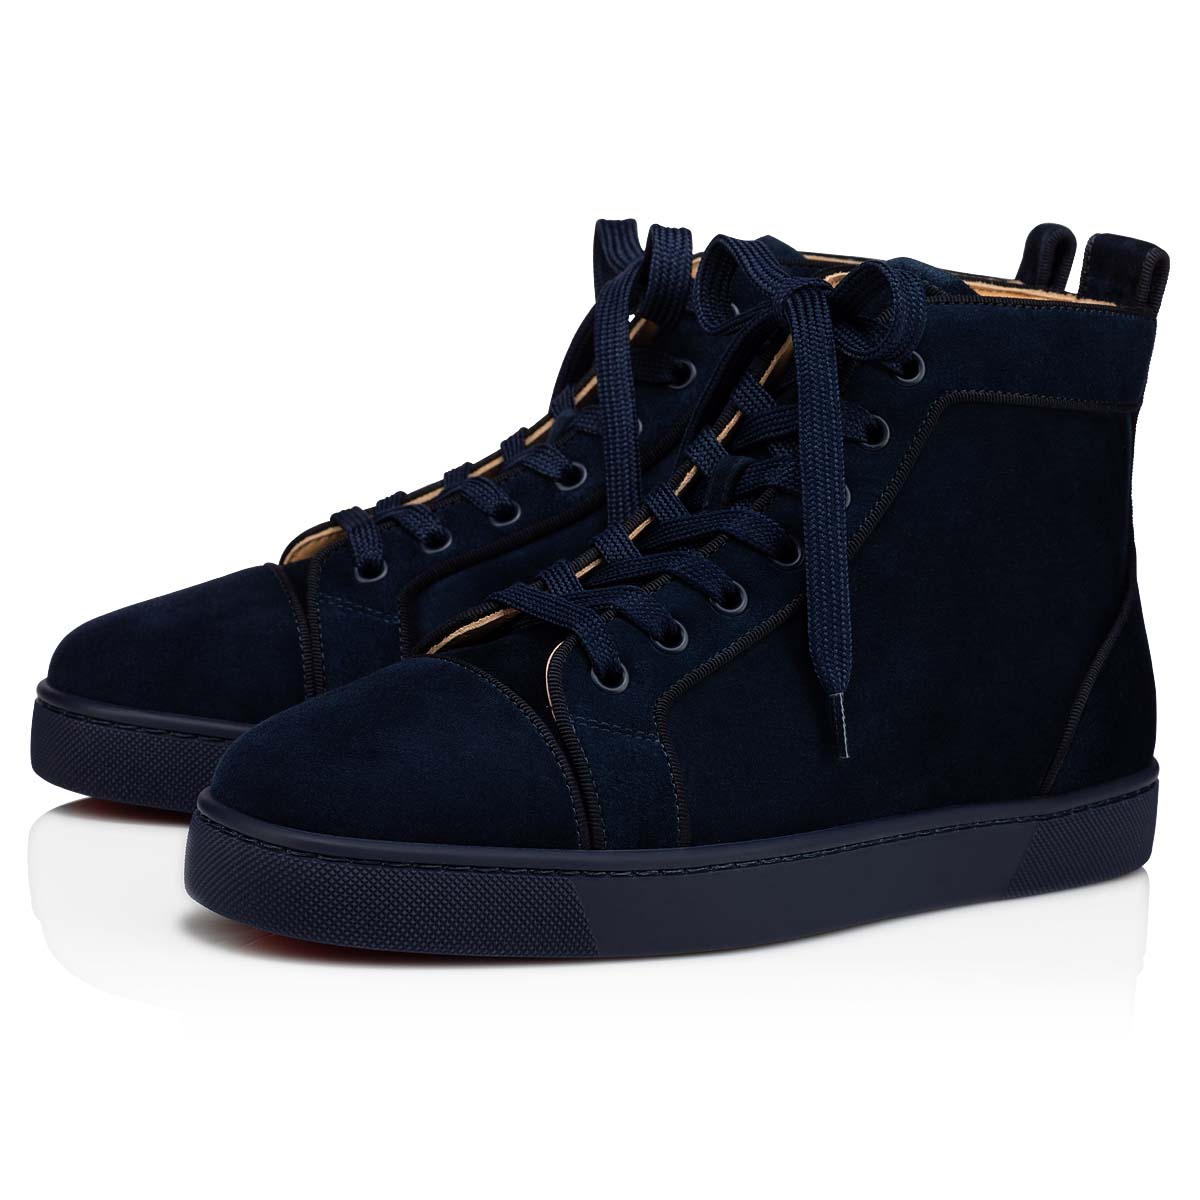 Louis high trainers Christian Louboutin Navy size 43.5 EU in Suede